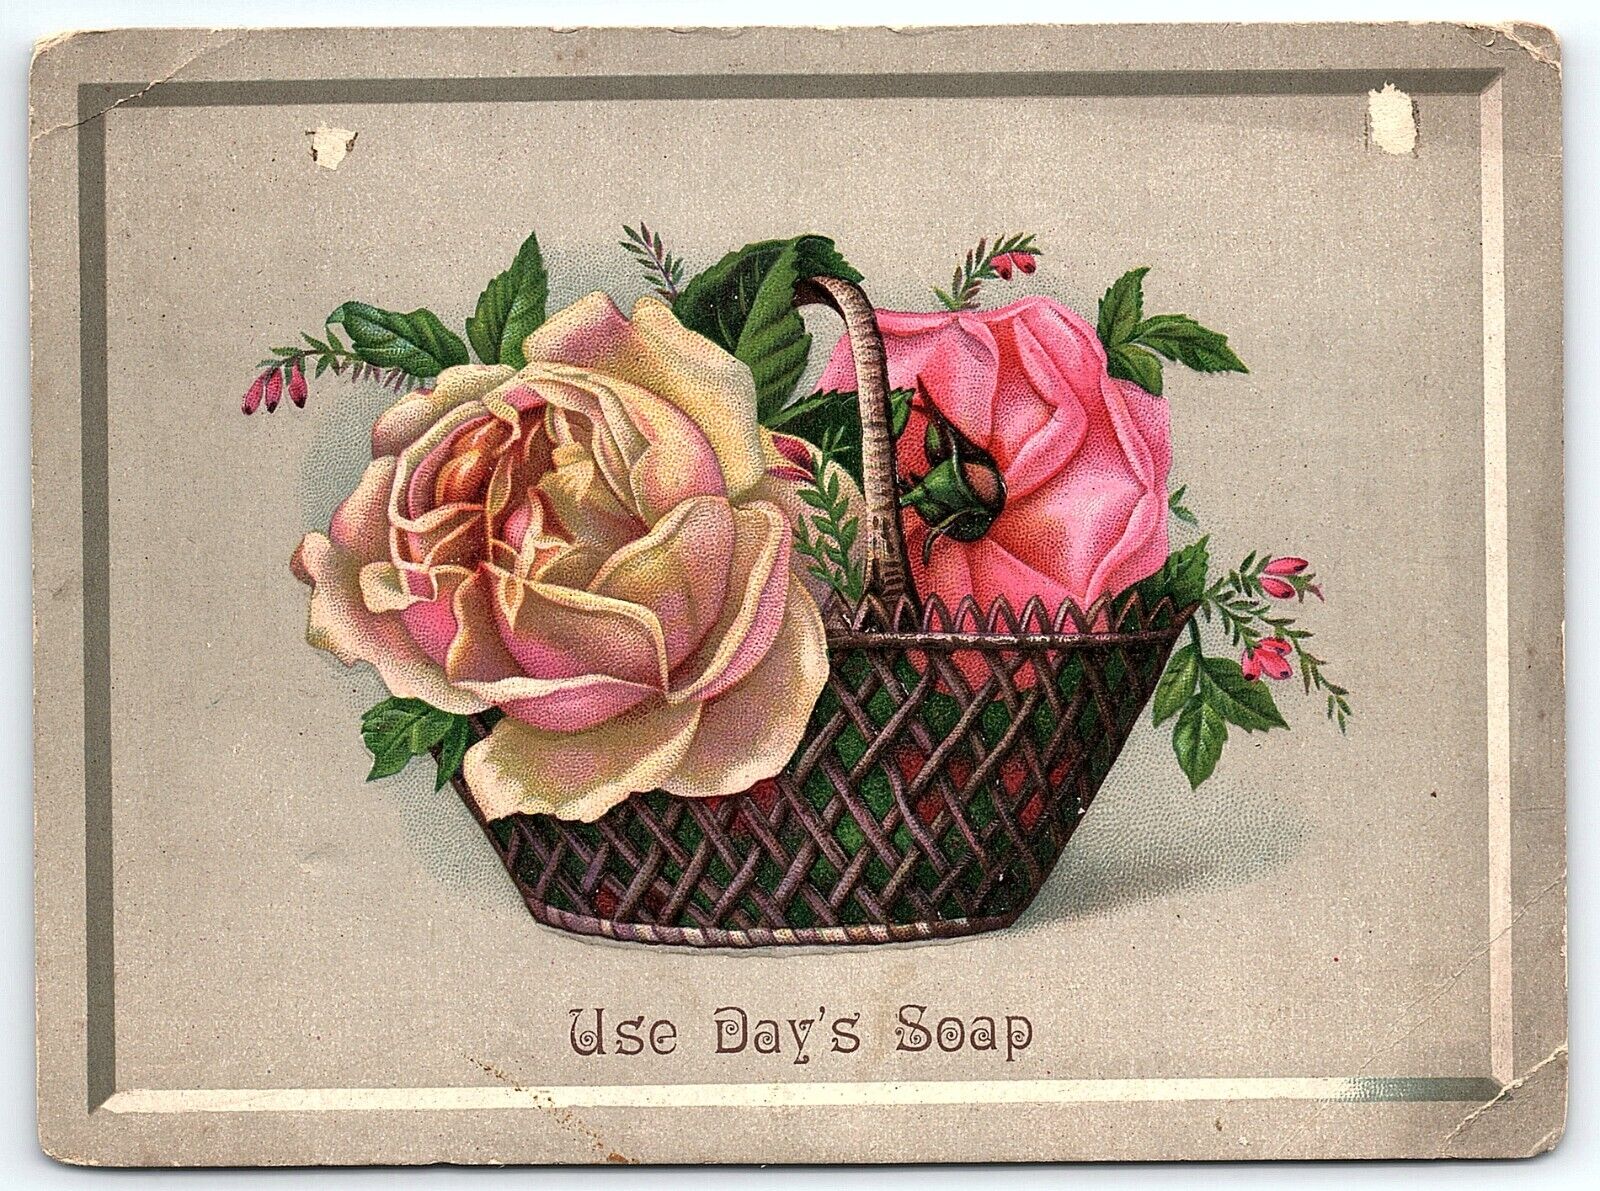 c1880 DAY'S SOAP PHILADELPHIA PA ROSES EMBOSSED LARGE VICTORIAN TRADE CARD Z4102